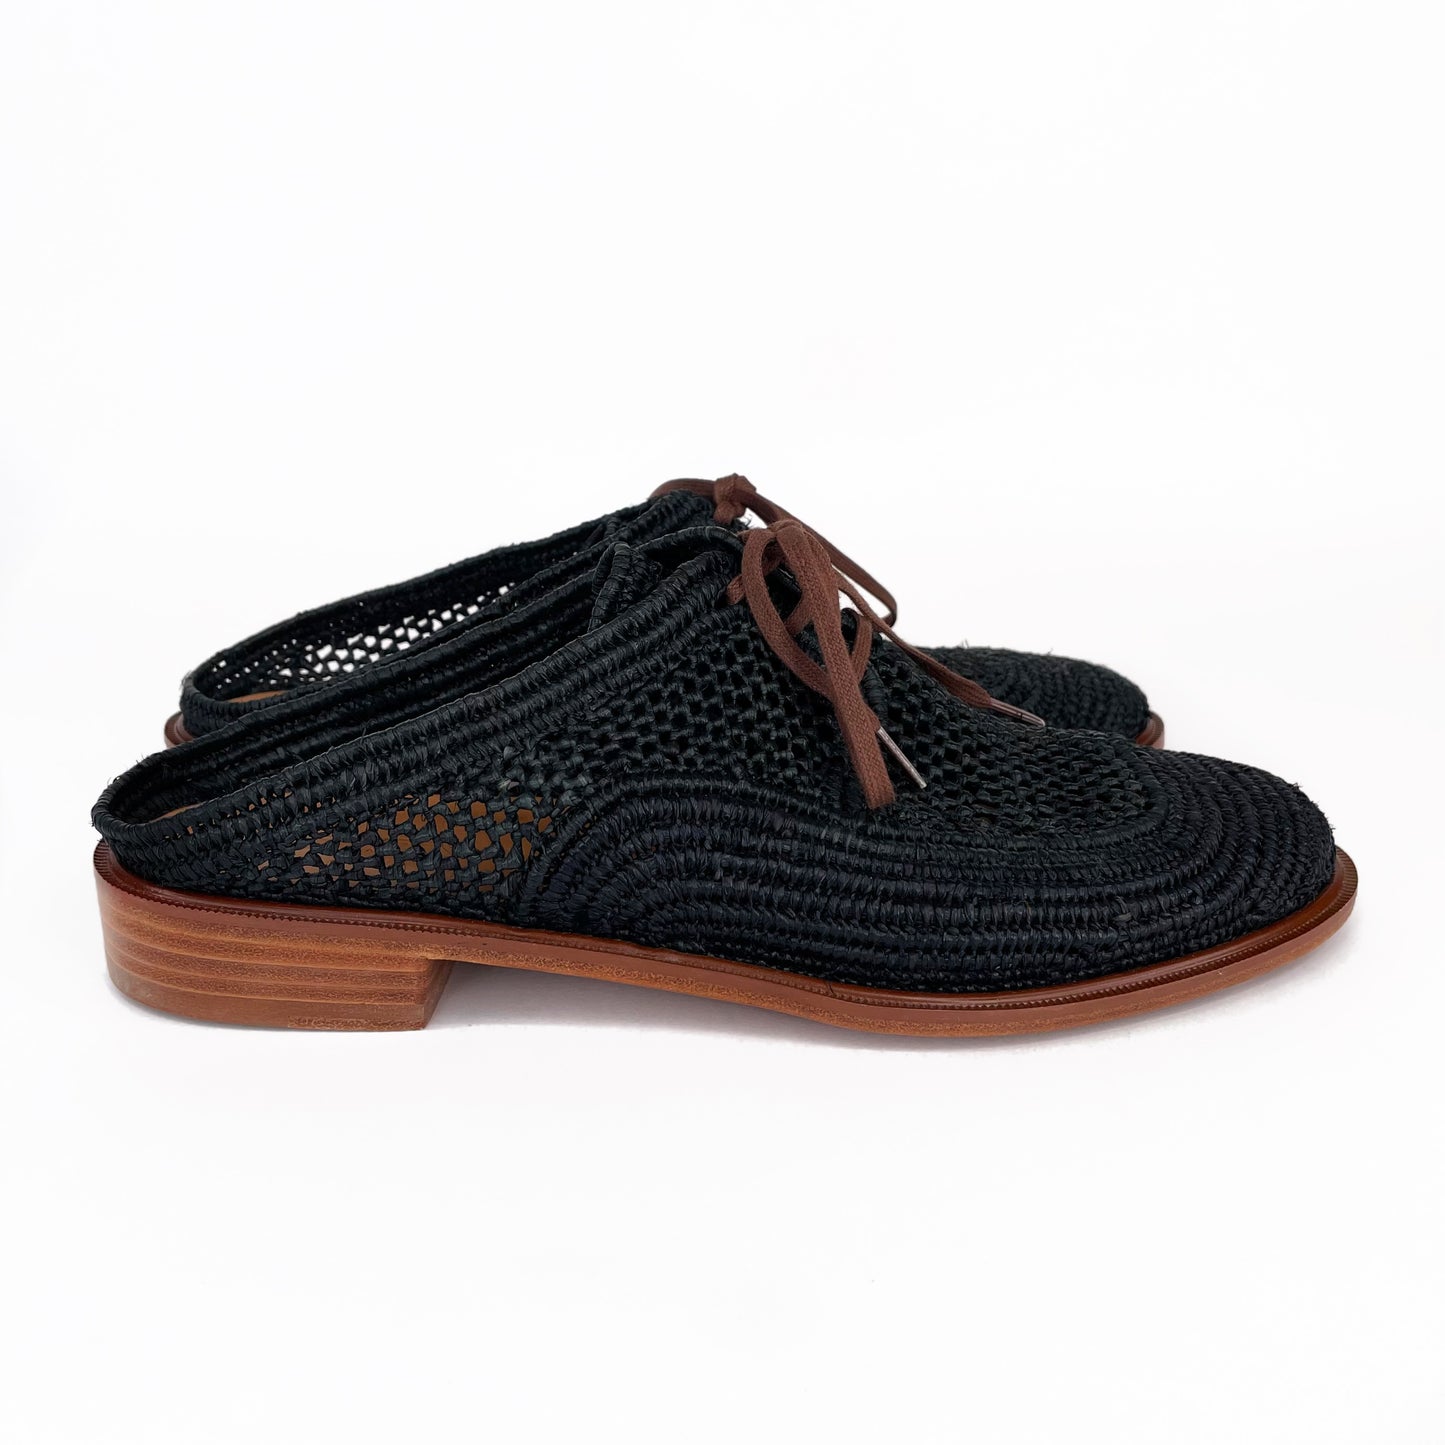 Clergerie Loafer Mules